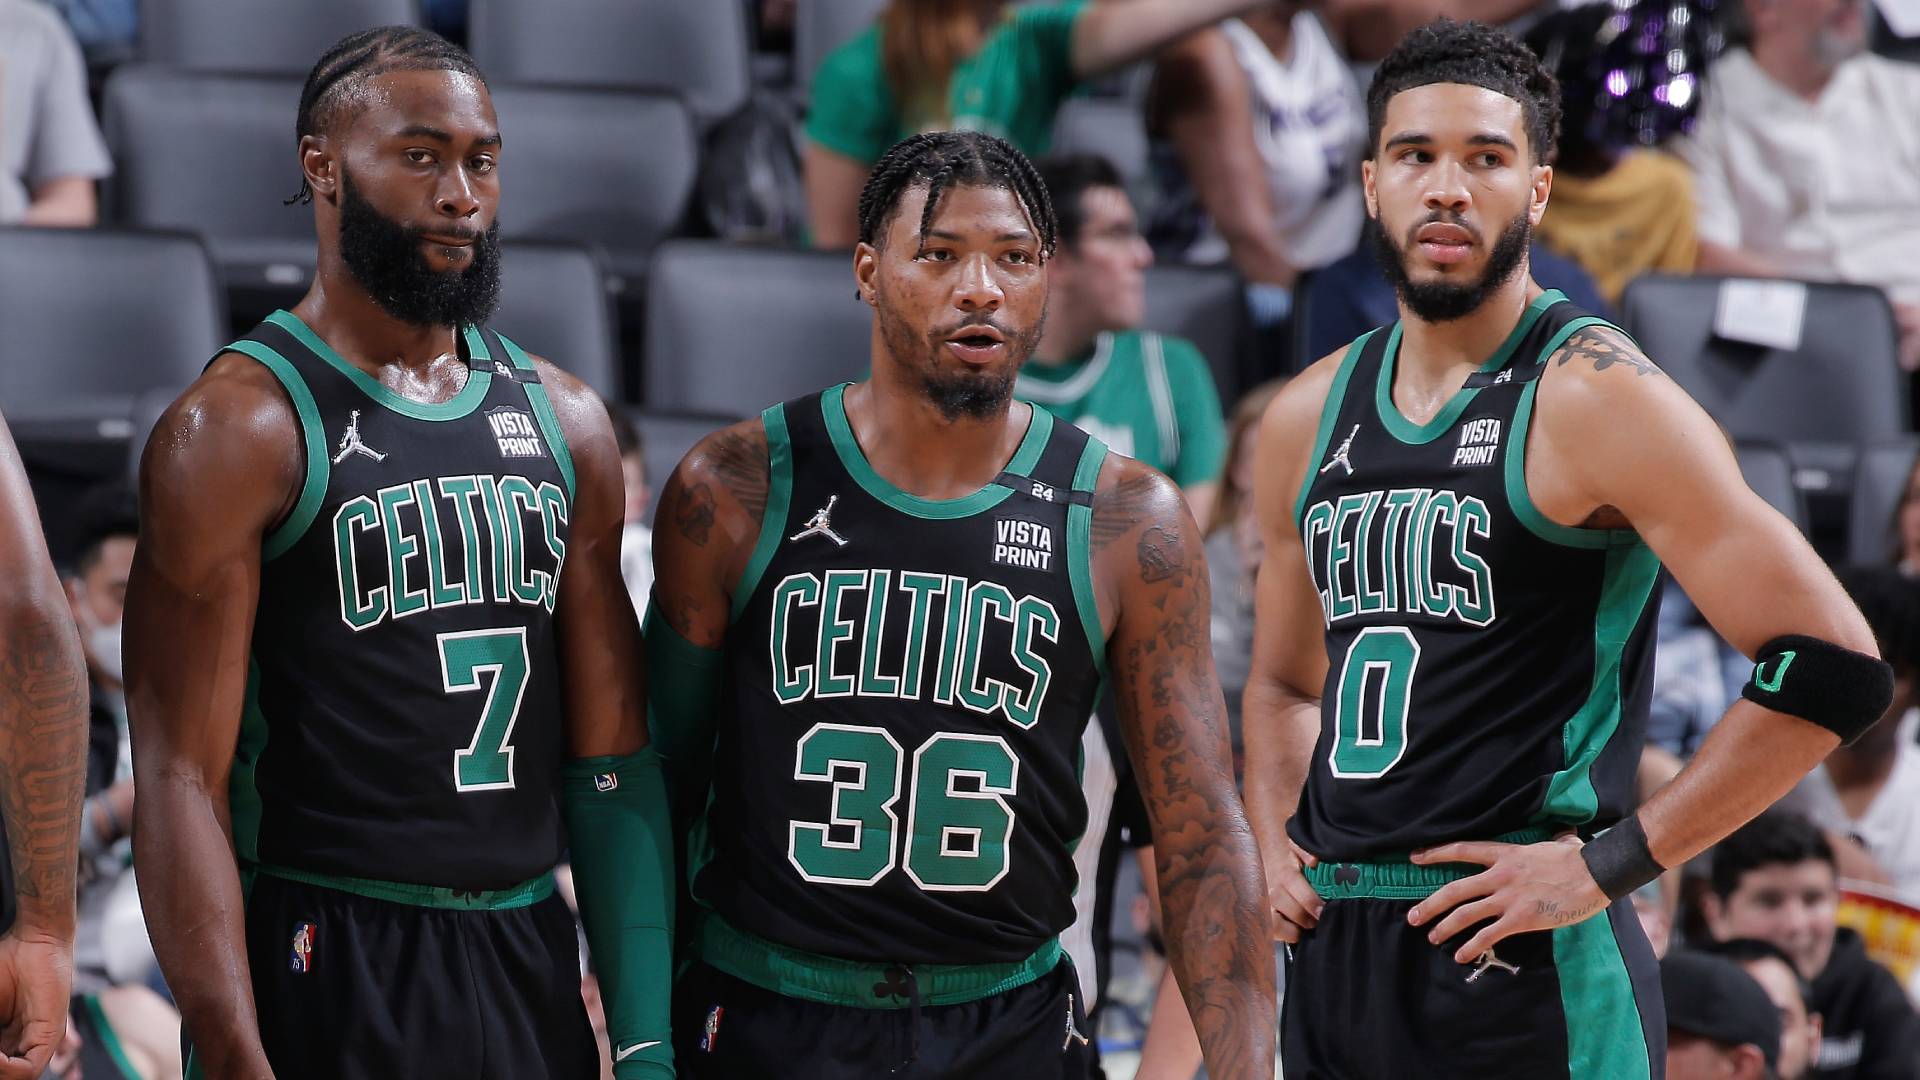 We were all shocked': Jayson Tatum, Jaylen Brown and Marcus Smart among Celtics players to react to suspension of head coach Ime Udoka